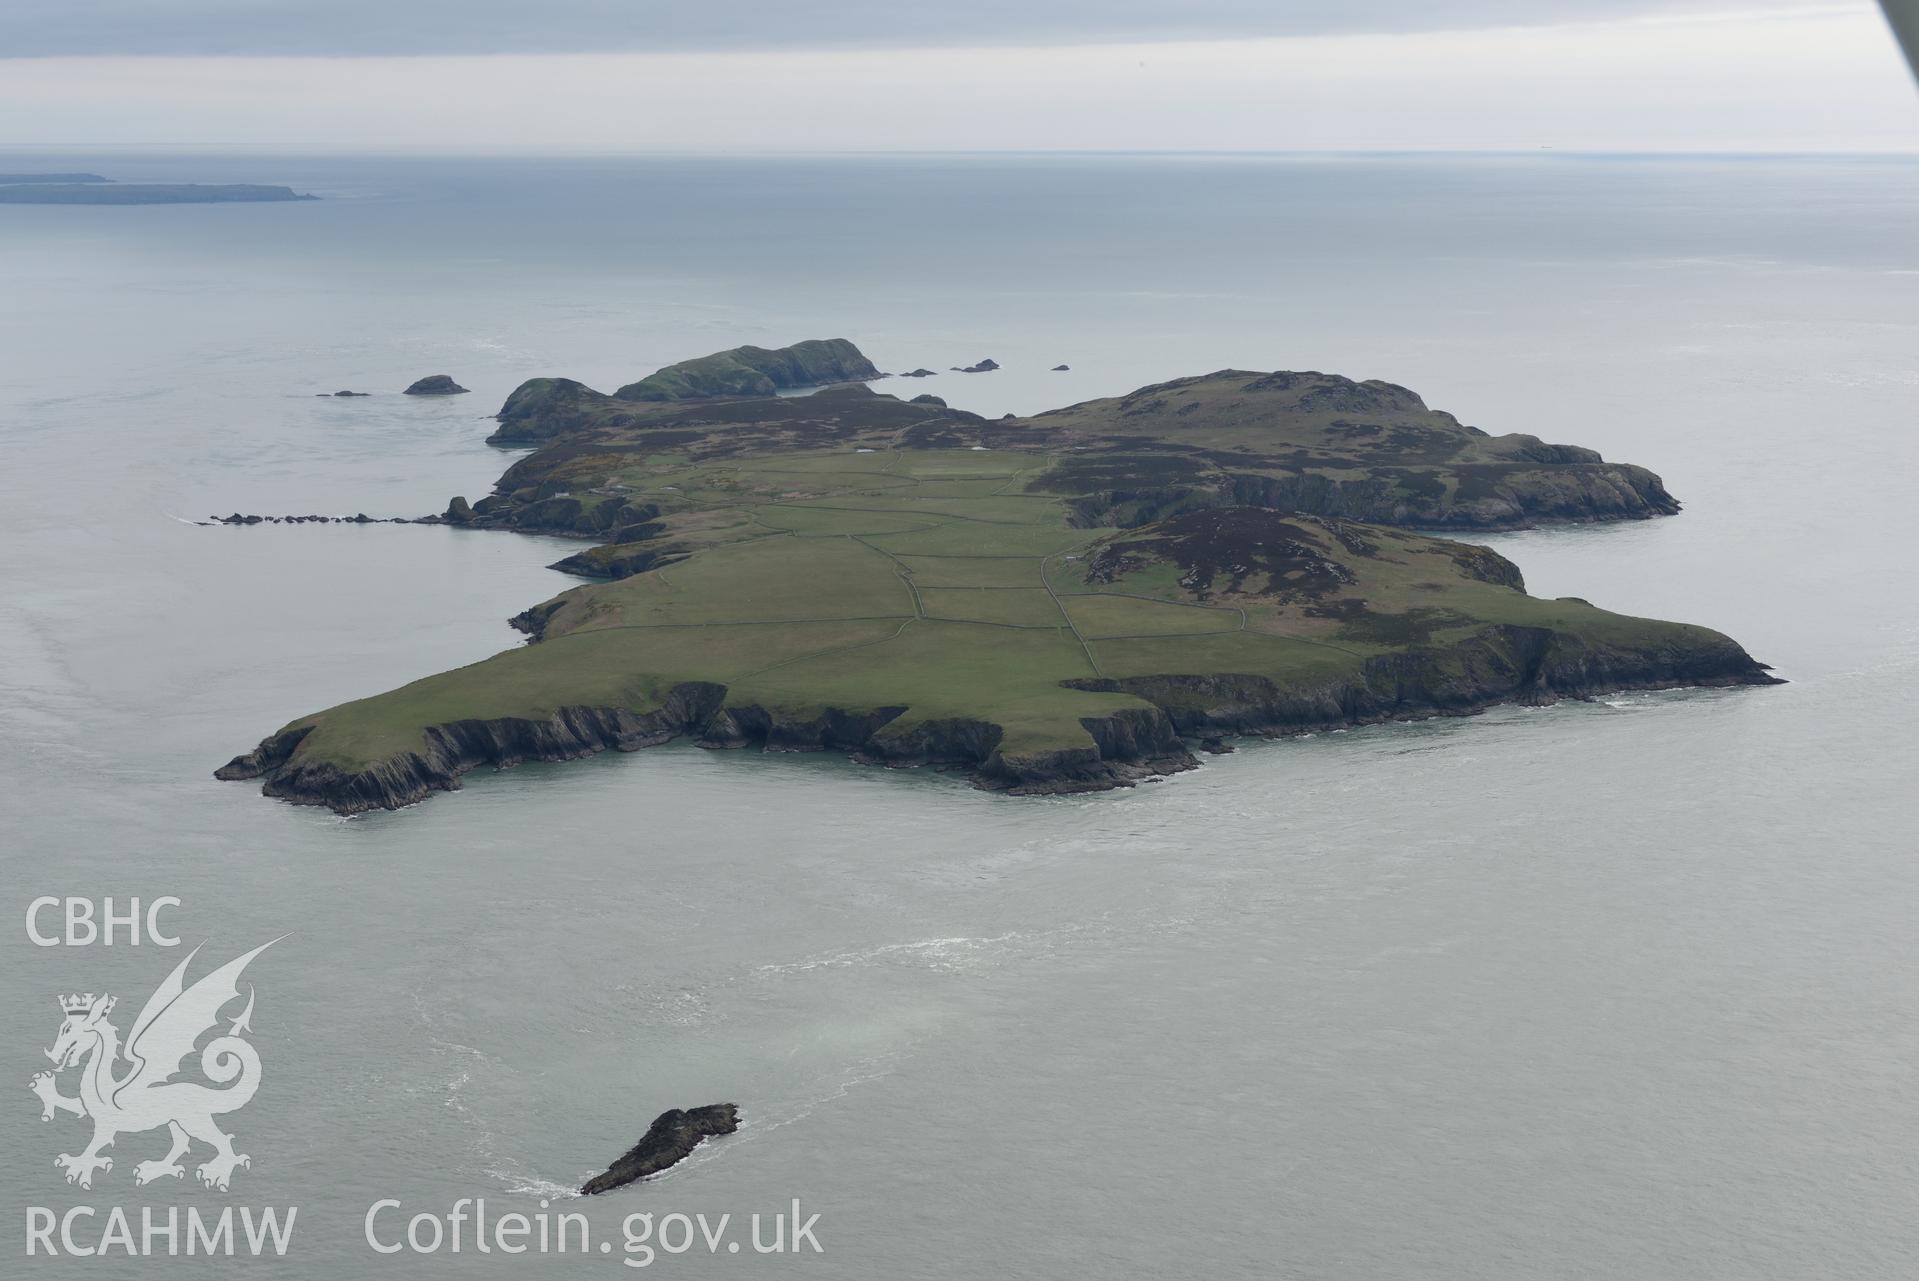 Ramsey island at extreme low tide. Baseline aerial reconnaissance survey for the CHERISH Project. ? Crown: CHERISH PROJECT 2017. Produced with EU funds through the Ireland Wales Co-operation Programme 2014-2020. All material made freely available through the Open Government Licence.